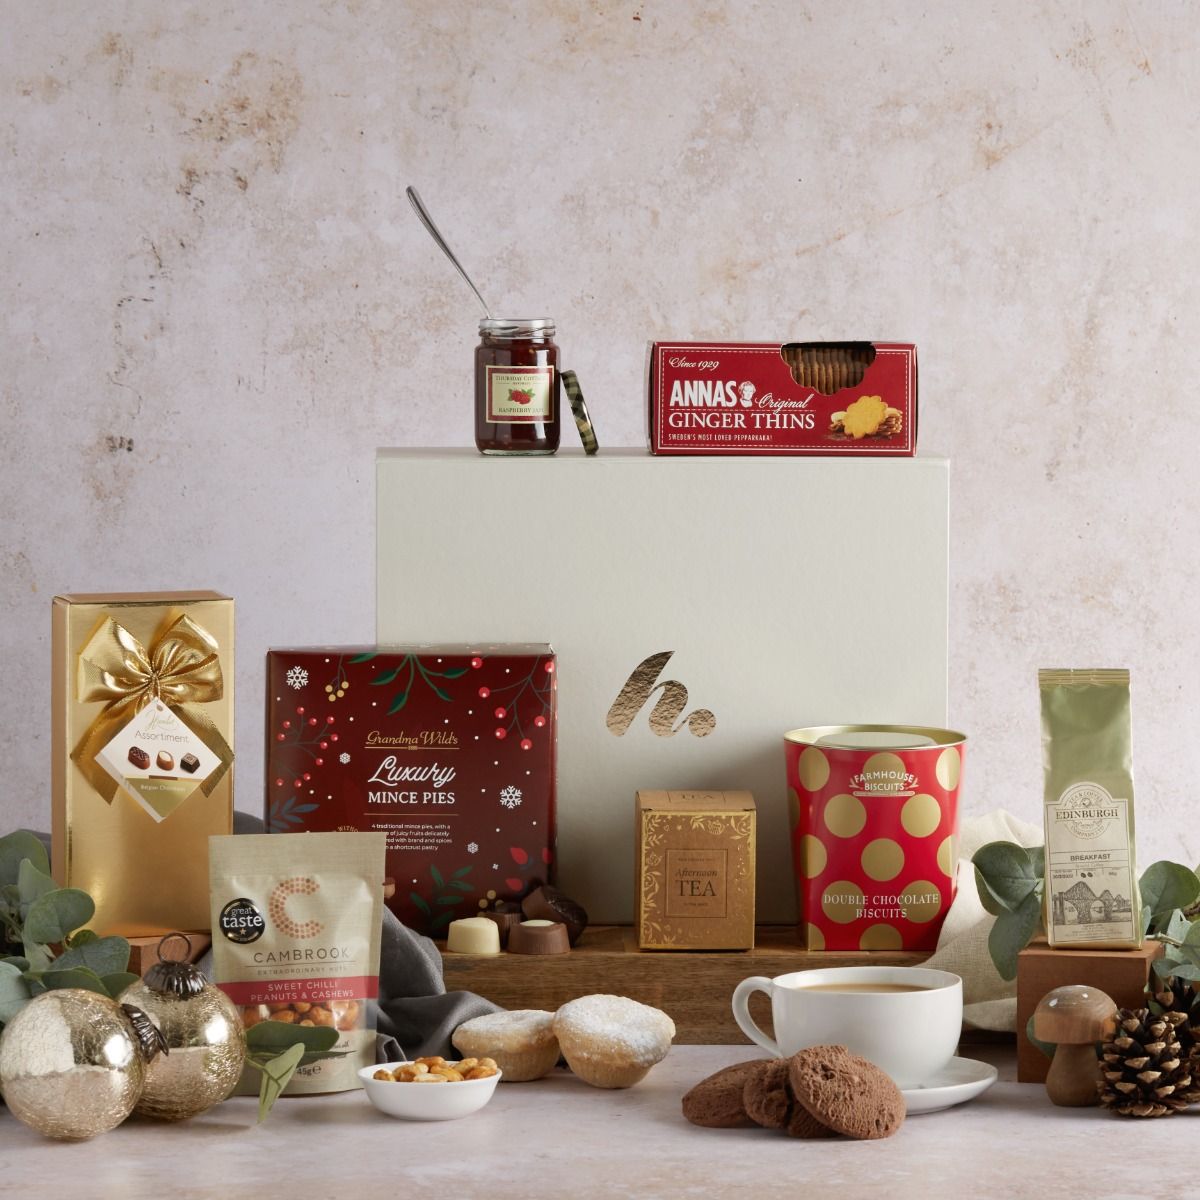 The Christmas Delights Hamper with contents on display